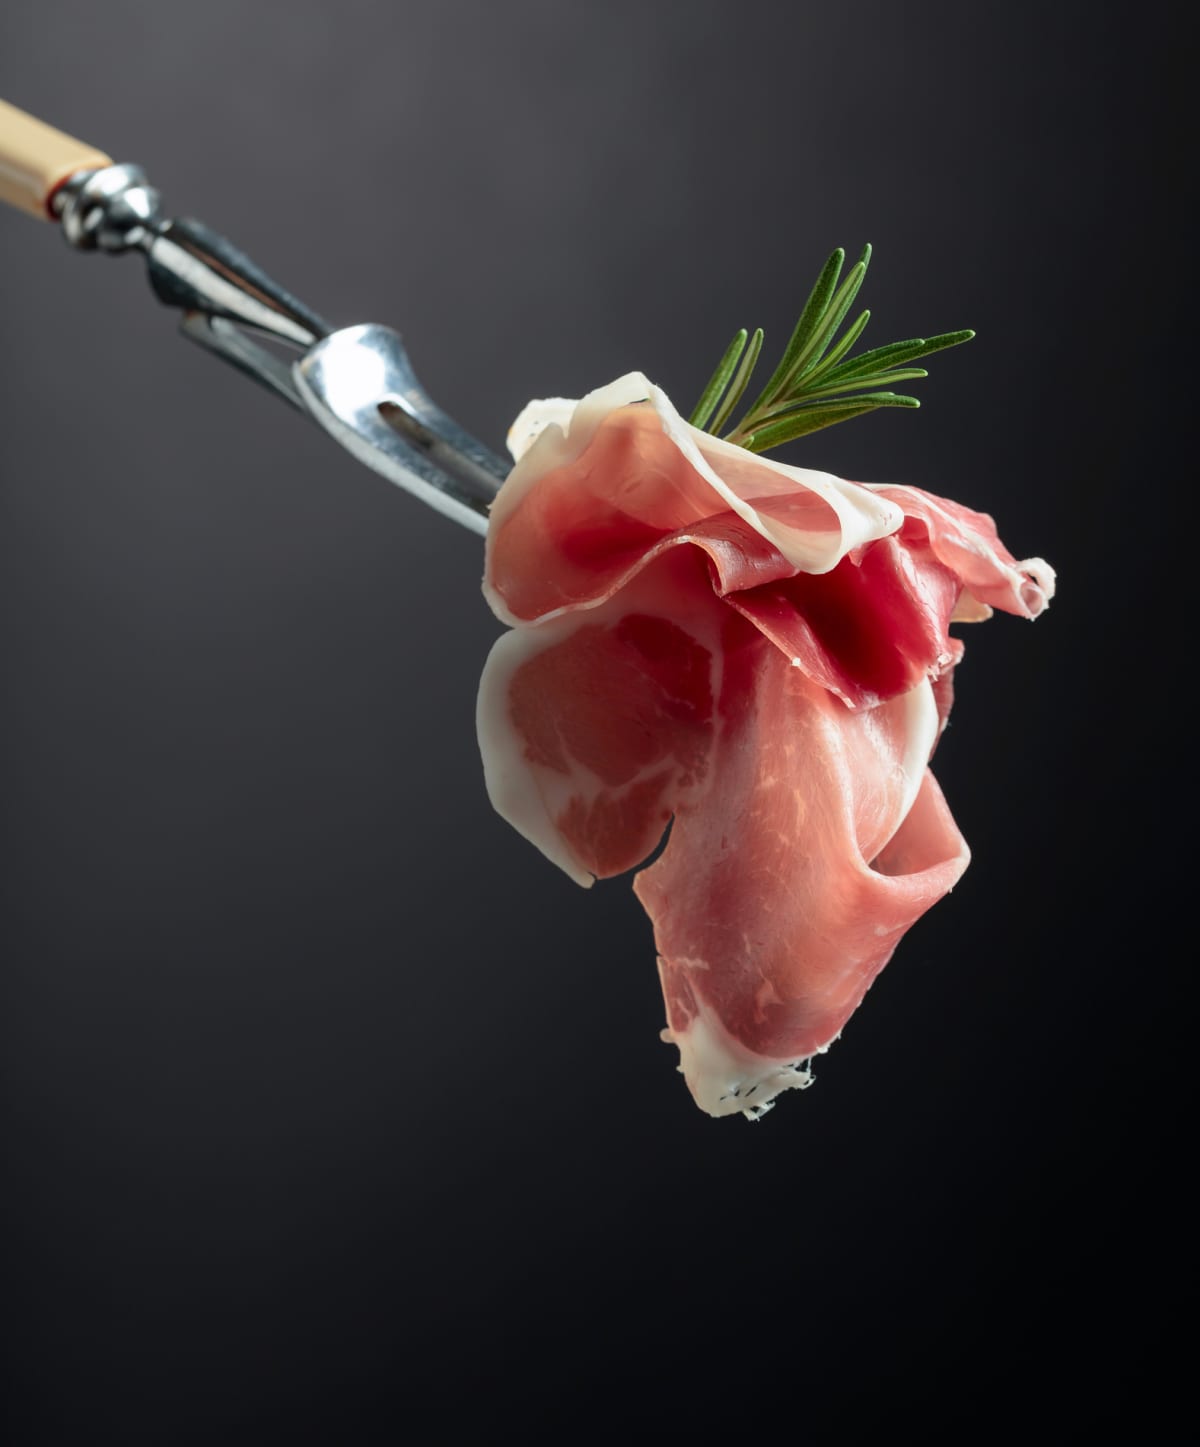 Sliced prosciutto with rosemary on a fork, black background, copy space.